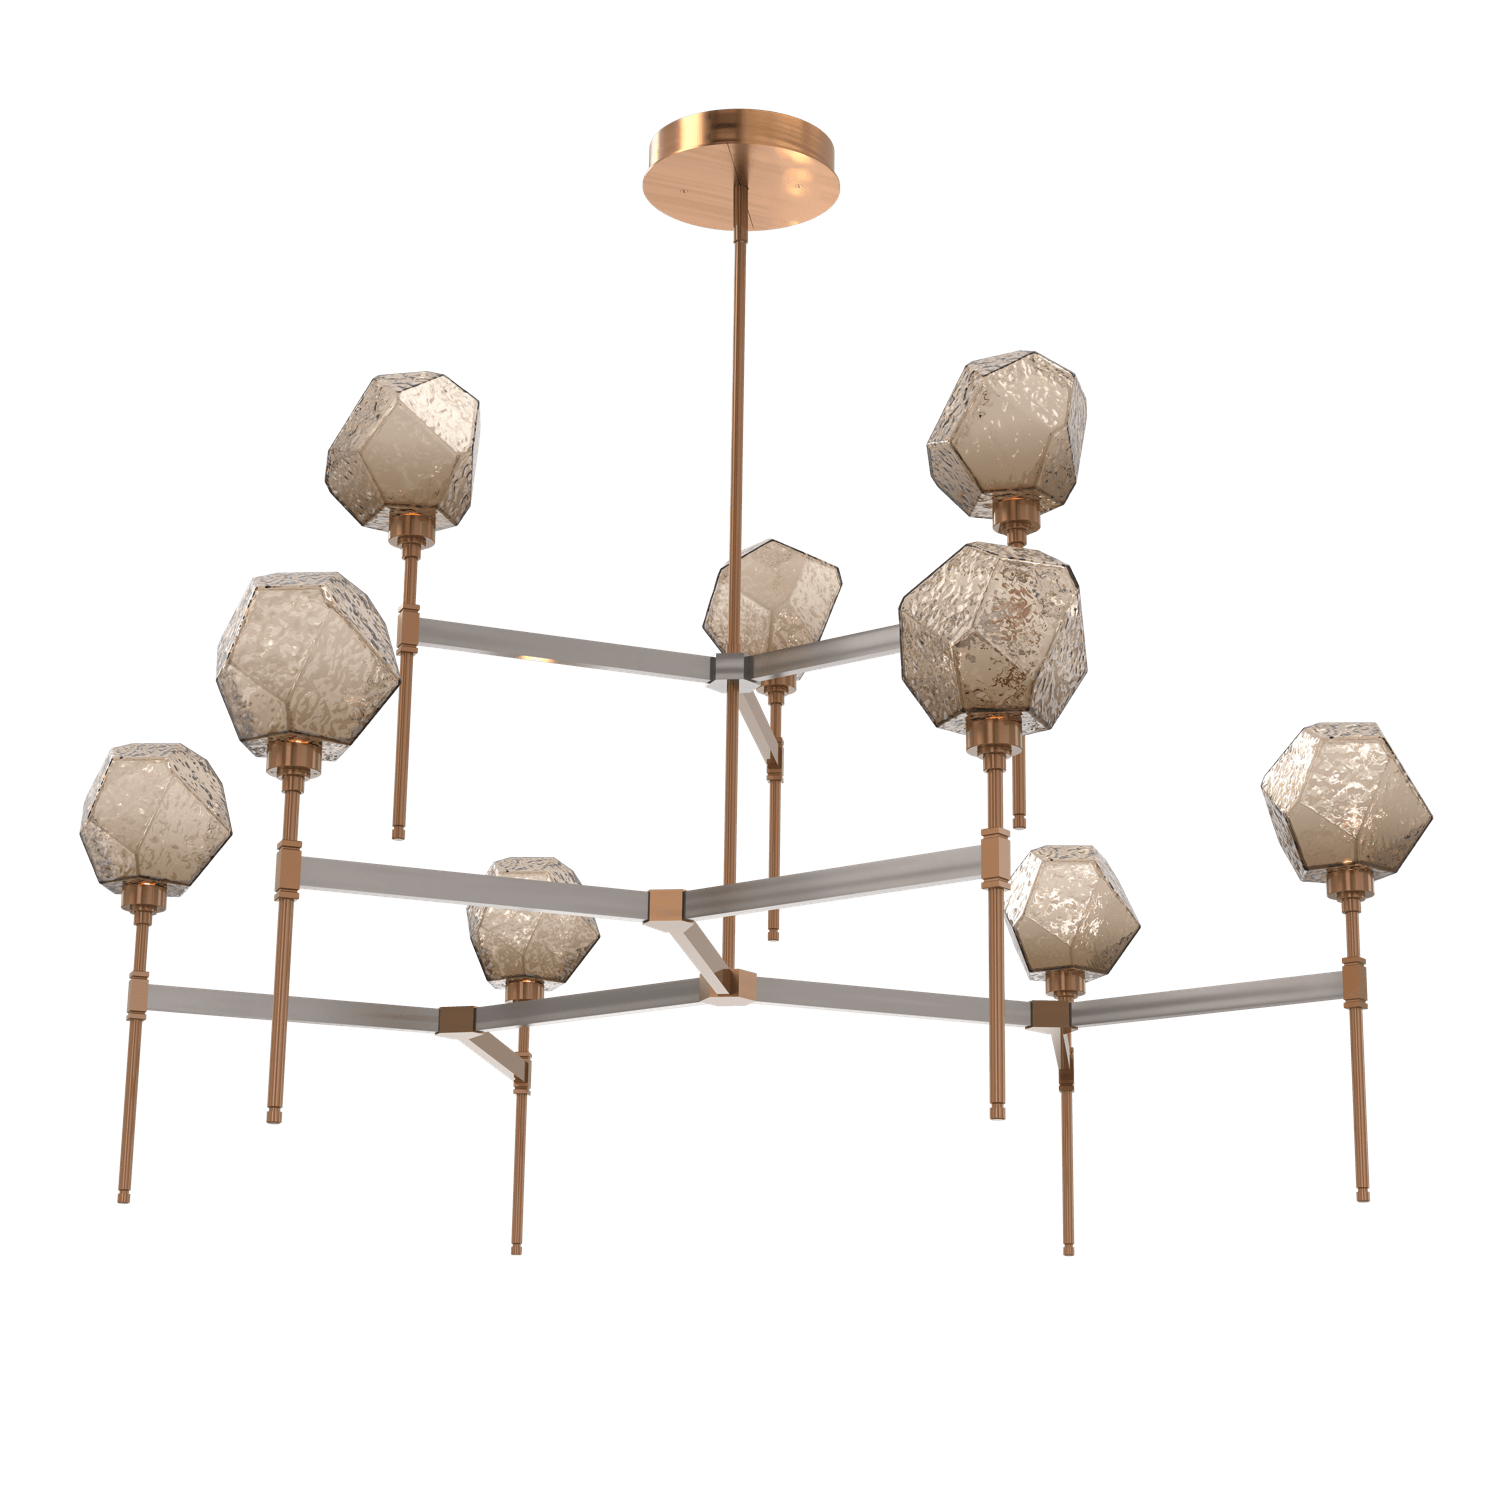 CHB0039-55-RB-B-Hammerton-Studio-Gem-round-two-tier-belvedere-chandelier-with-oil-rubbed-bronze-finish-and-bronze-blown-glass-shades-and-LED-lamping